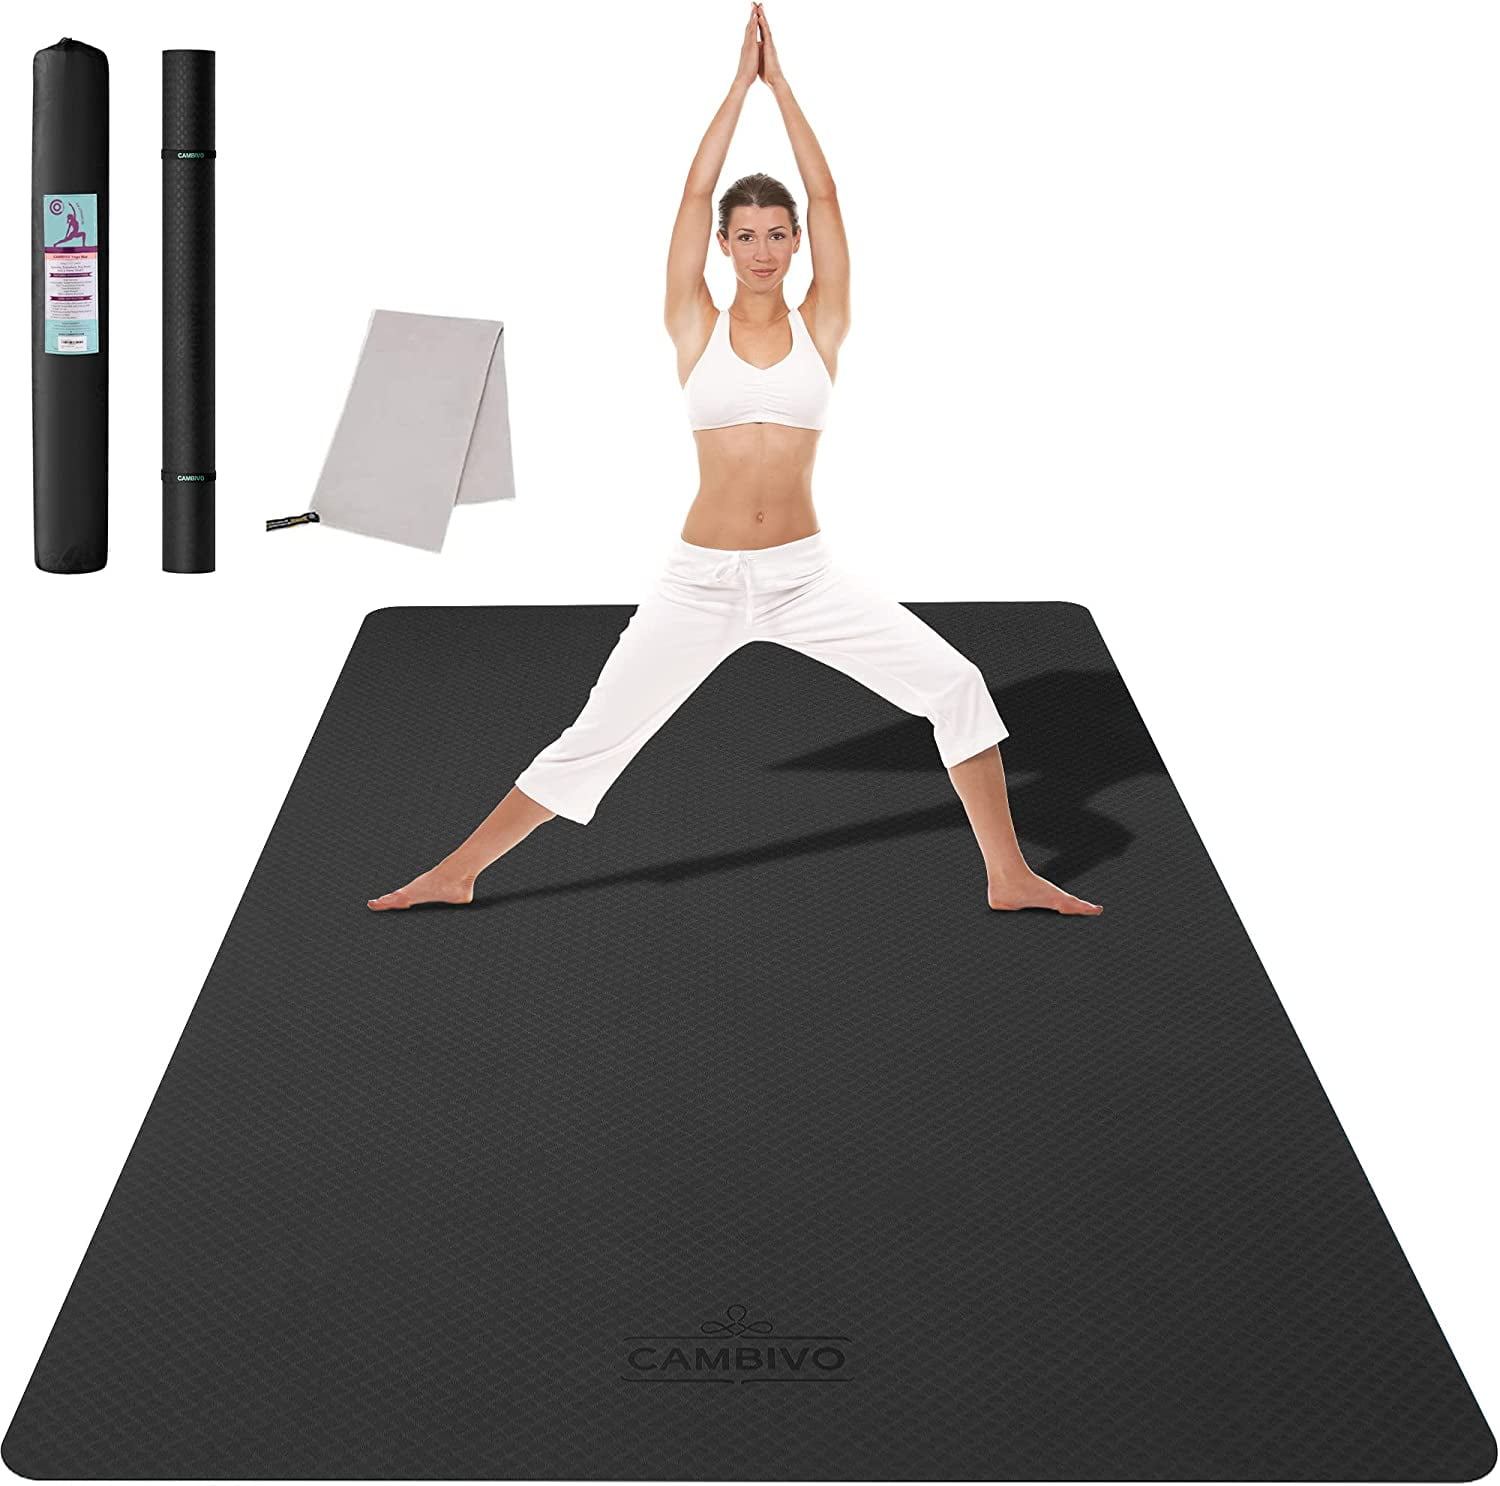 Review of the Large Yoga Mat and Large Exercise Mat from Gorilla